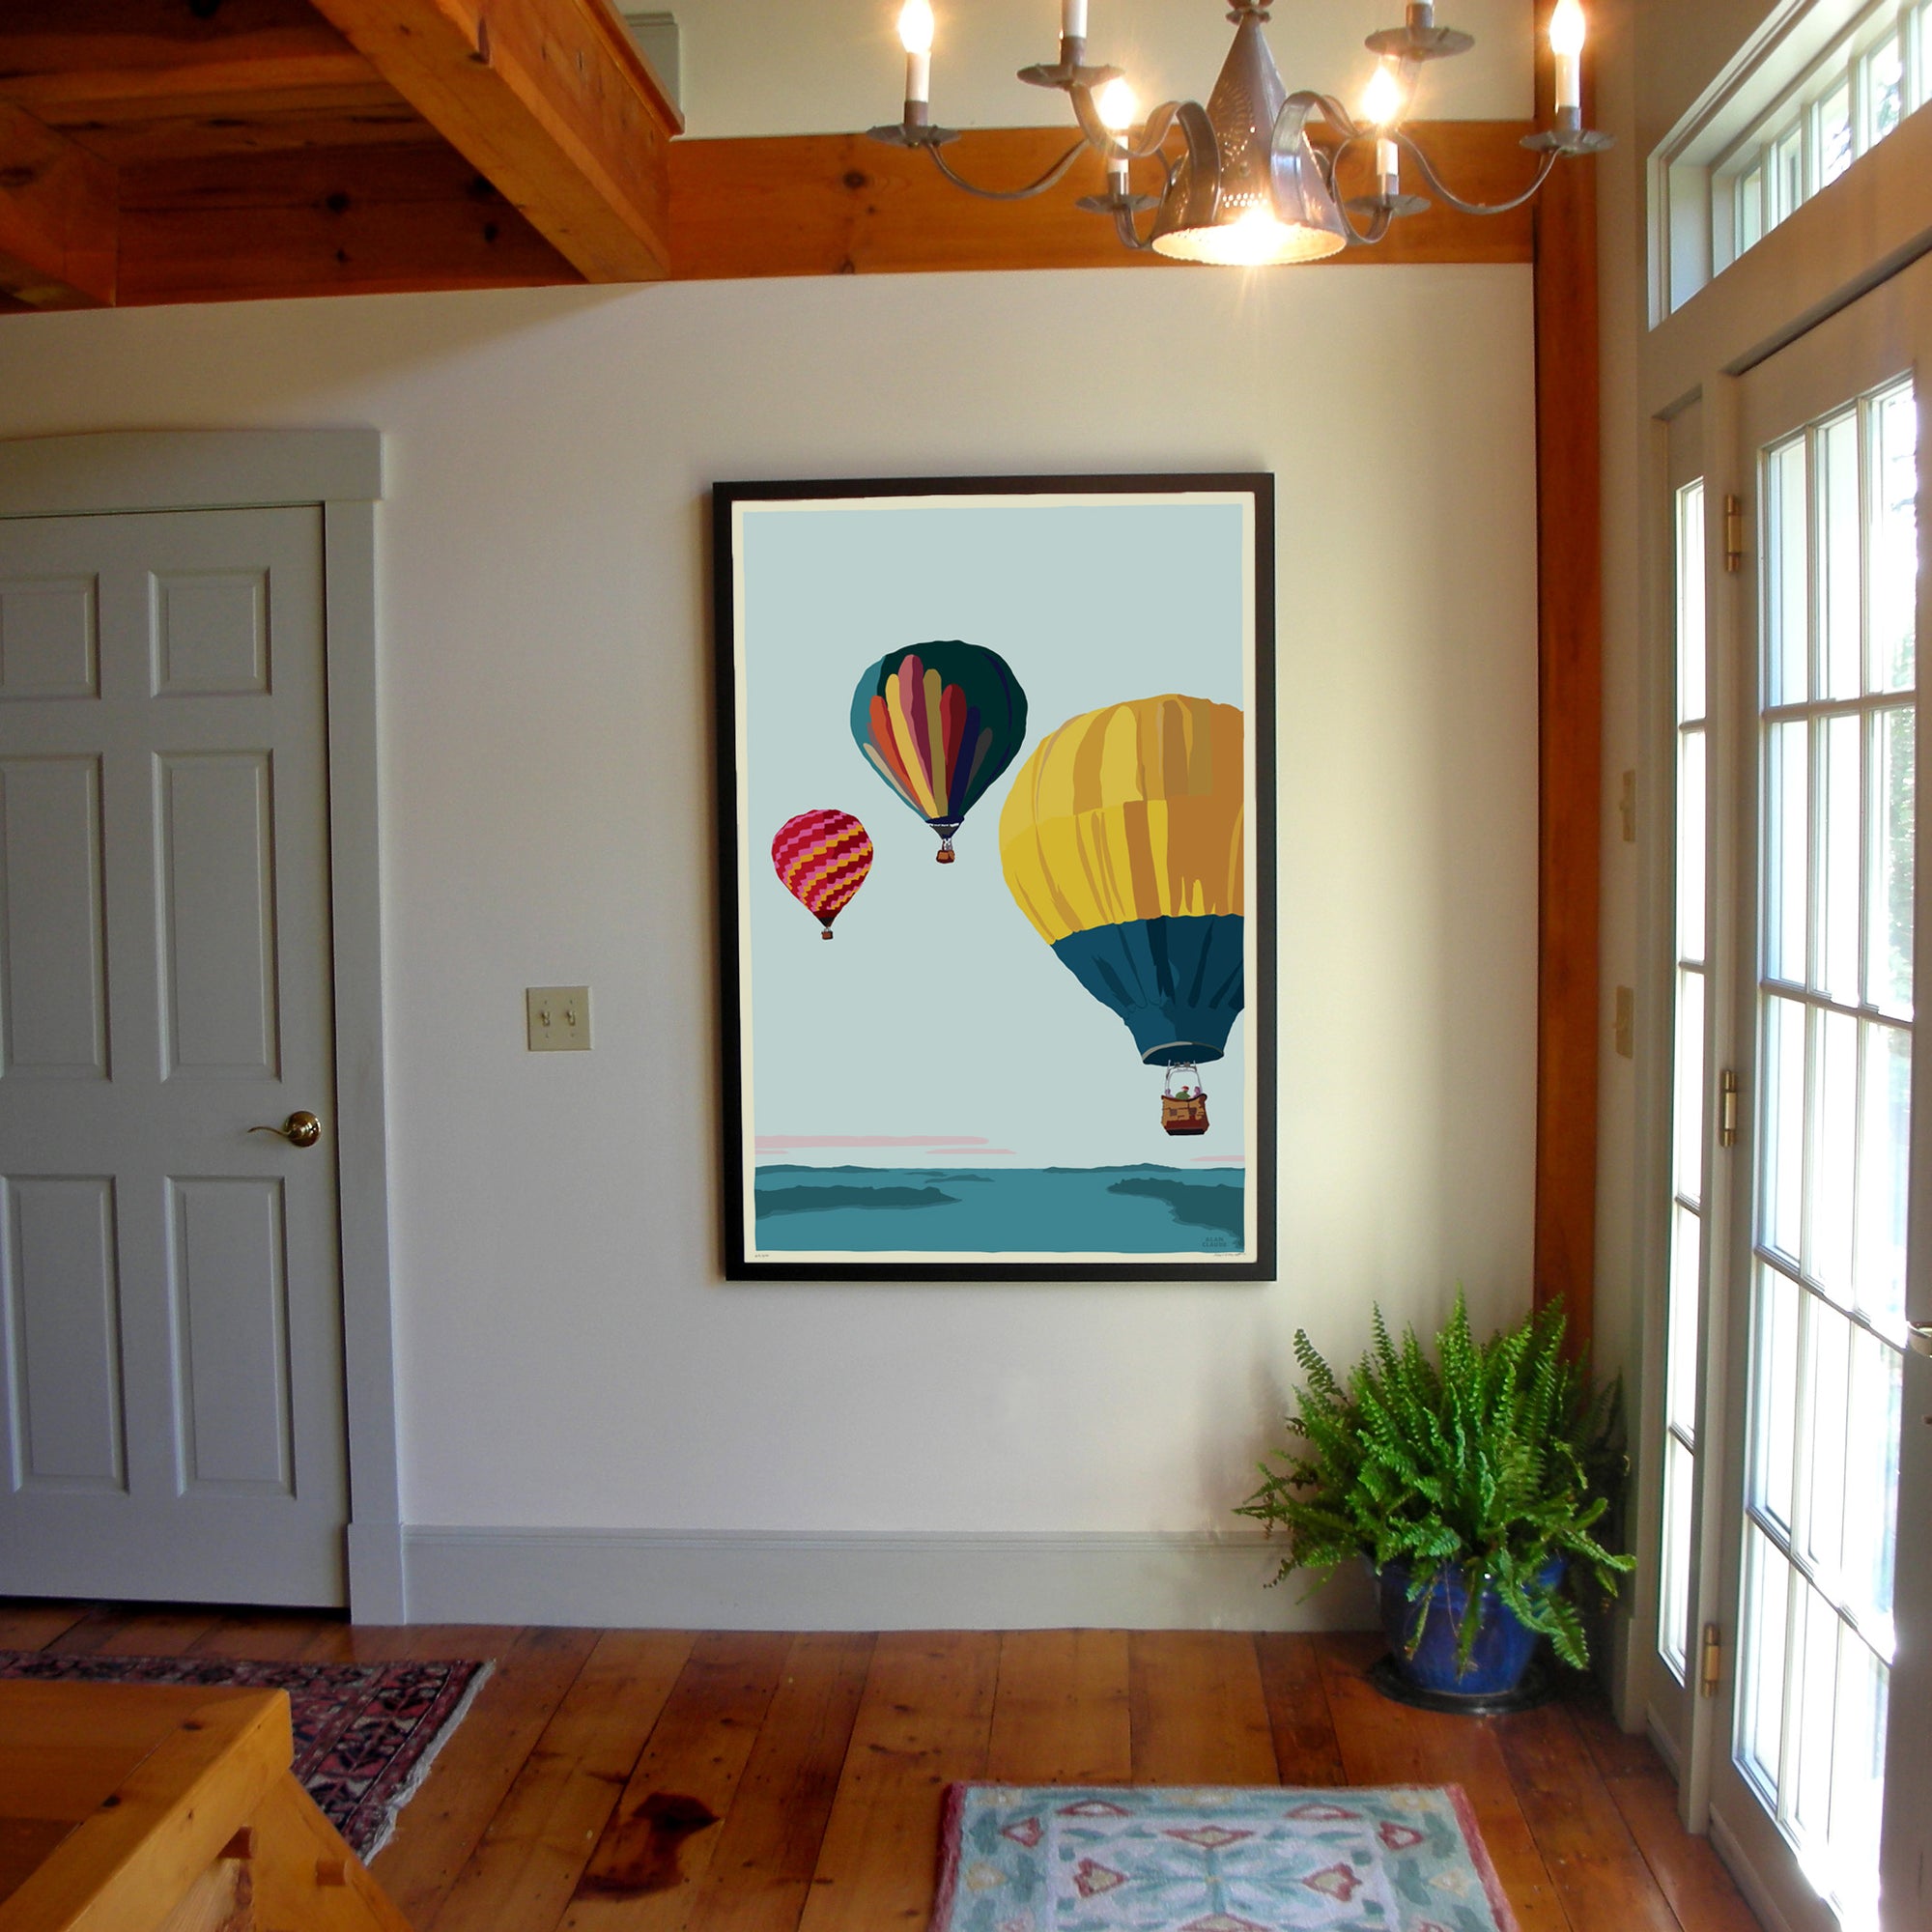 Balloons Over Islands Art Print 36" x 53" Framed Wall Poster By Alan Claude - Maine